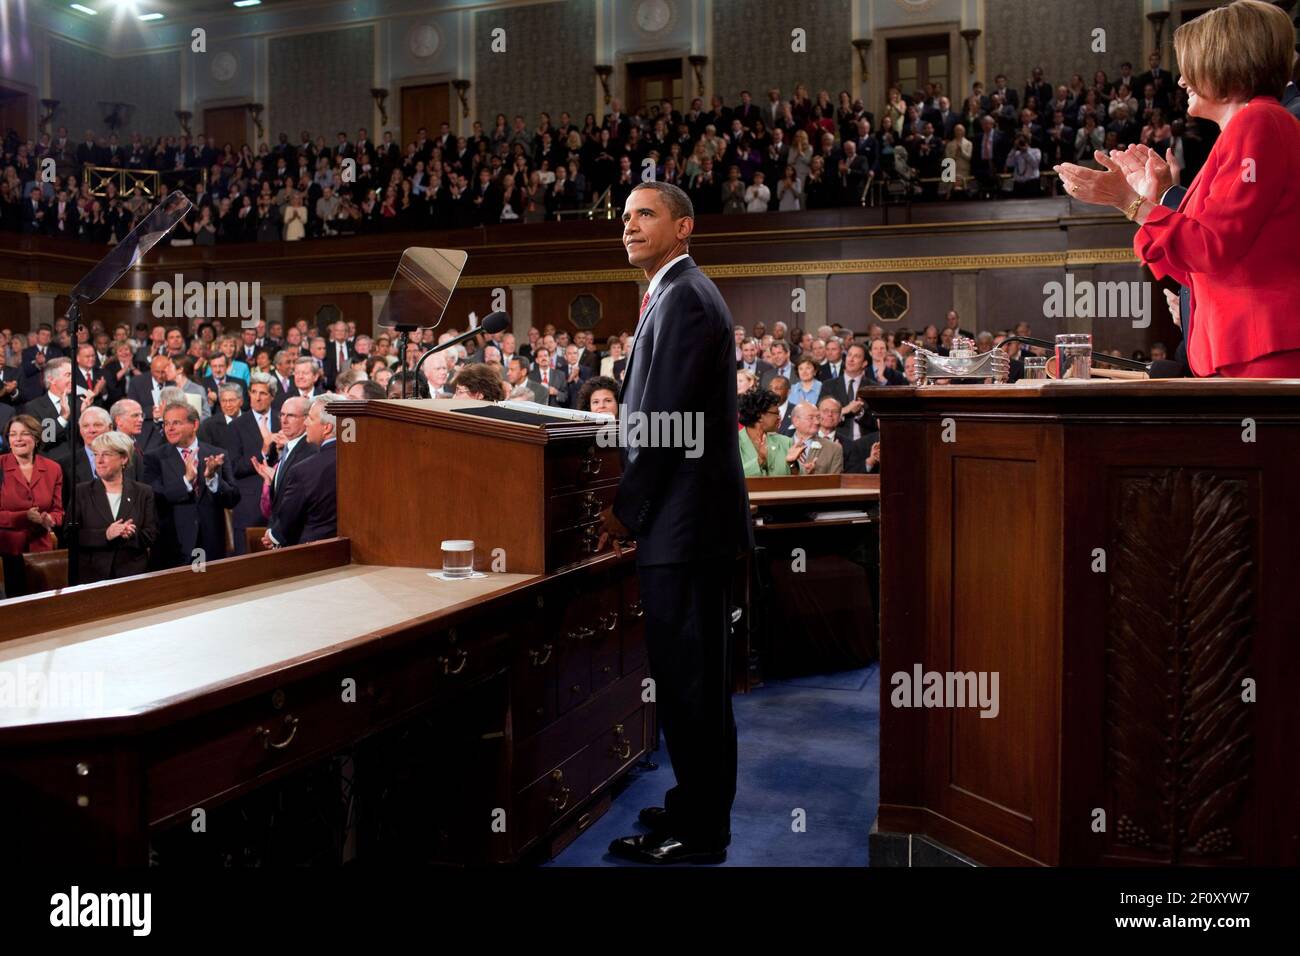 President Barack Obama looks towards the First Lady and guests seated in the gallery of the House Chamber at the U.S. Capitol in Washington, D.C., Sept. 9, 2009. Stock Photo